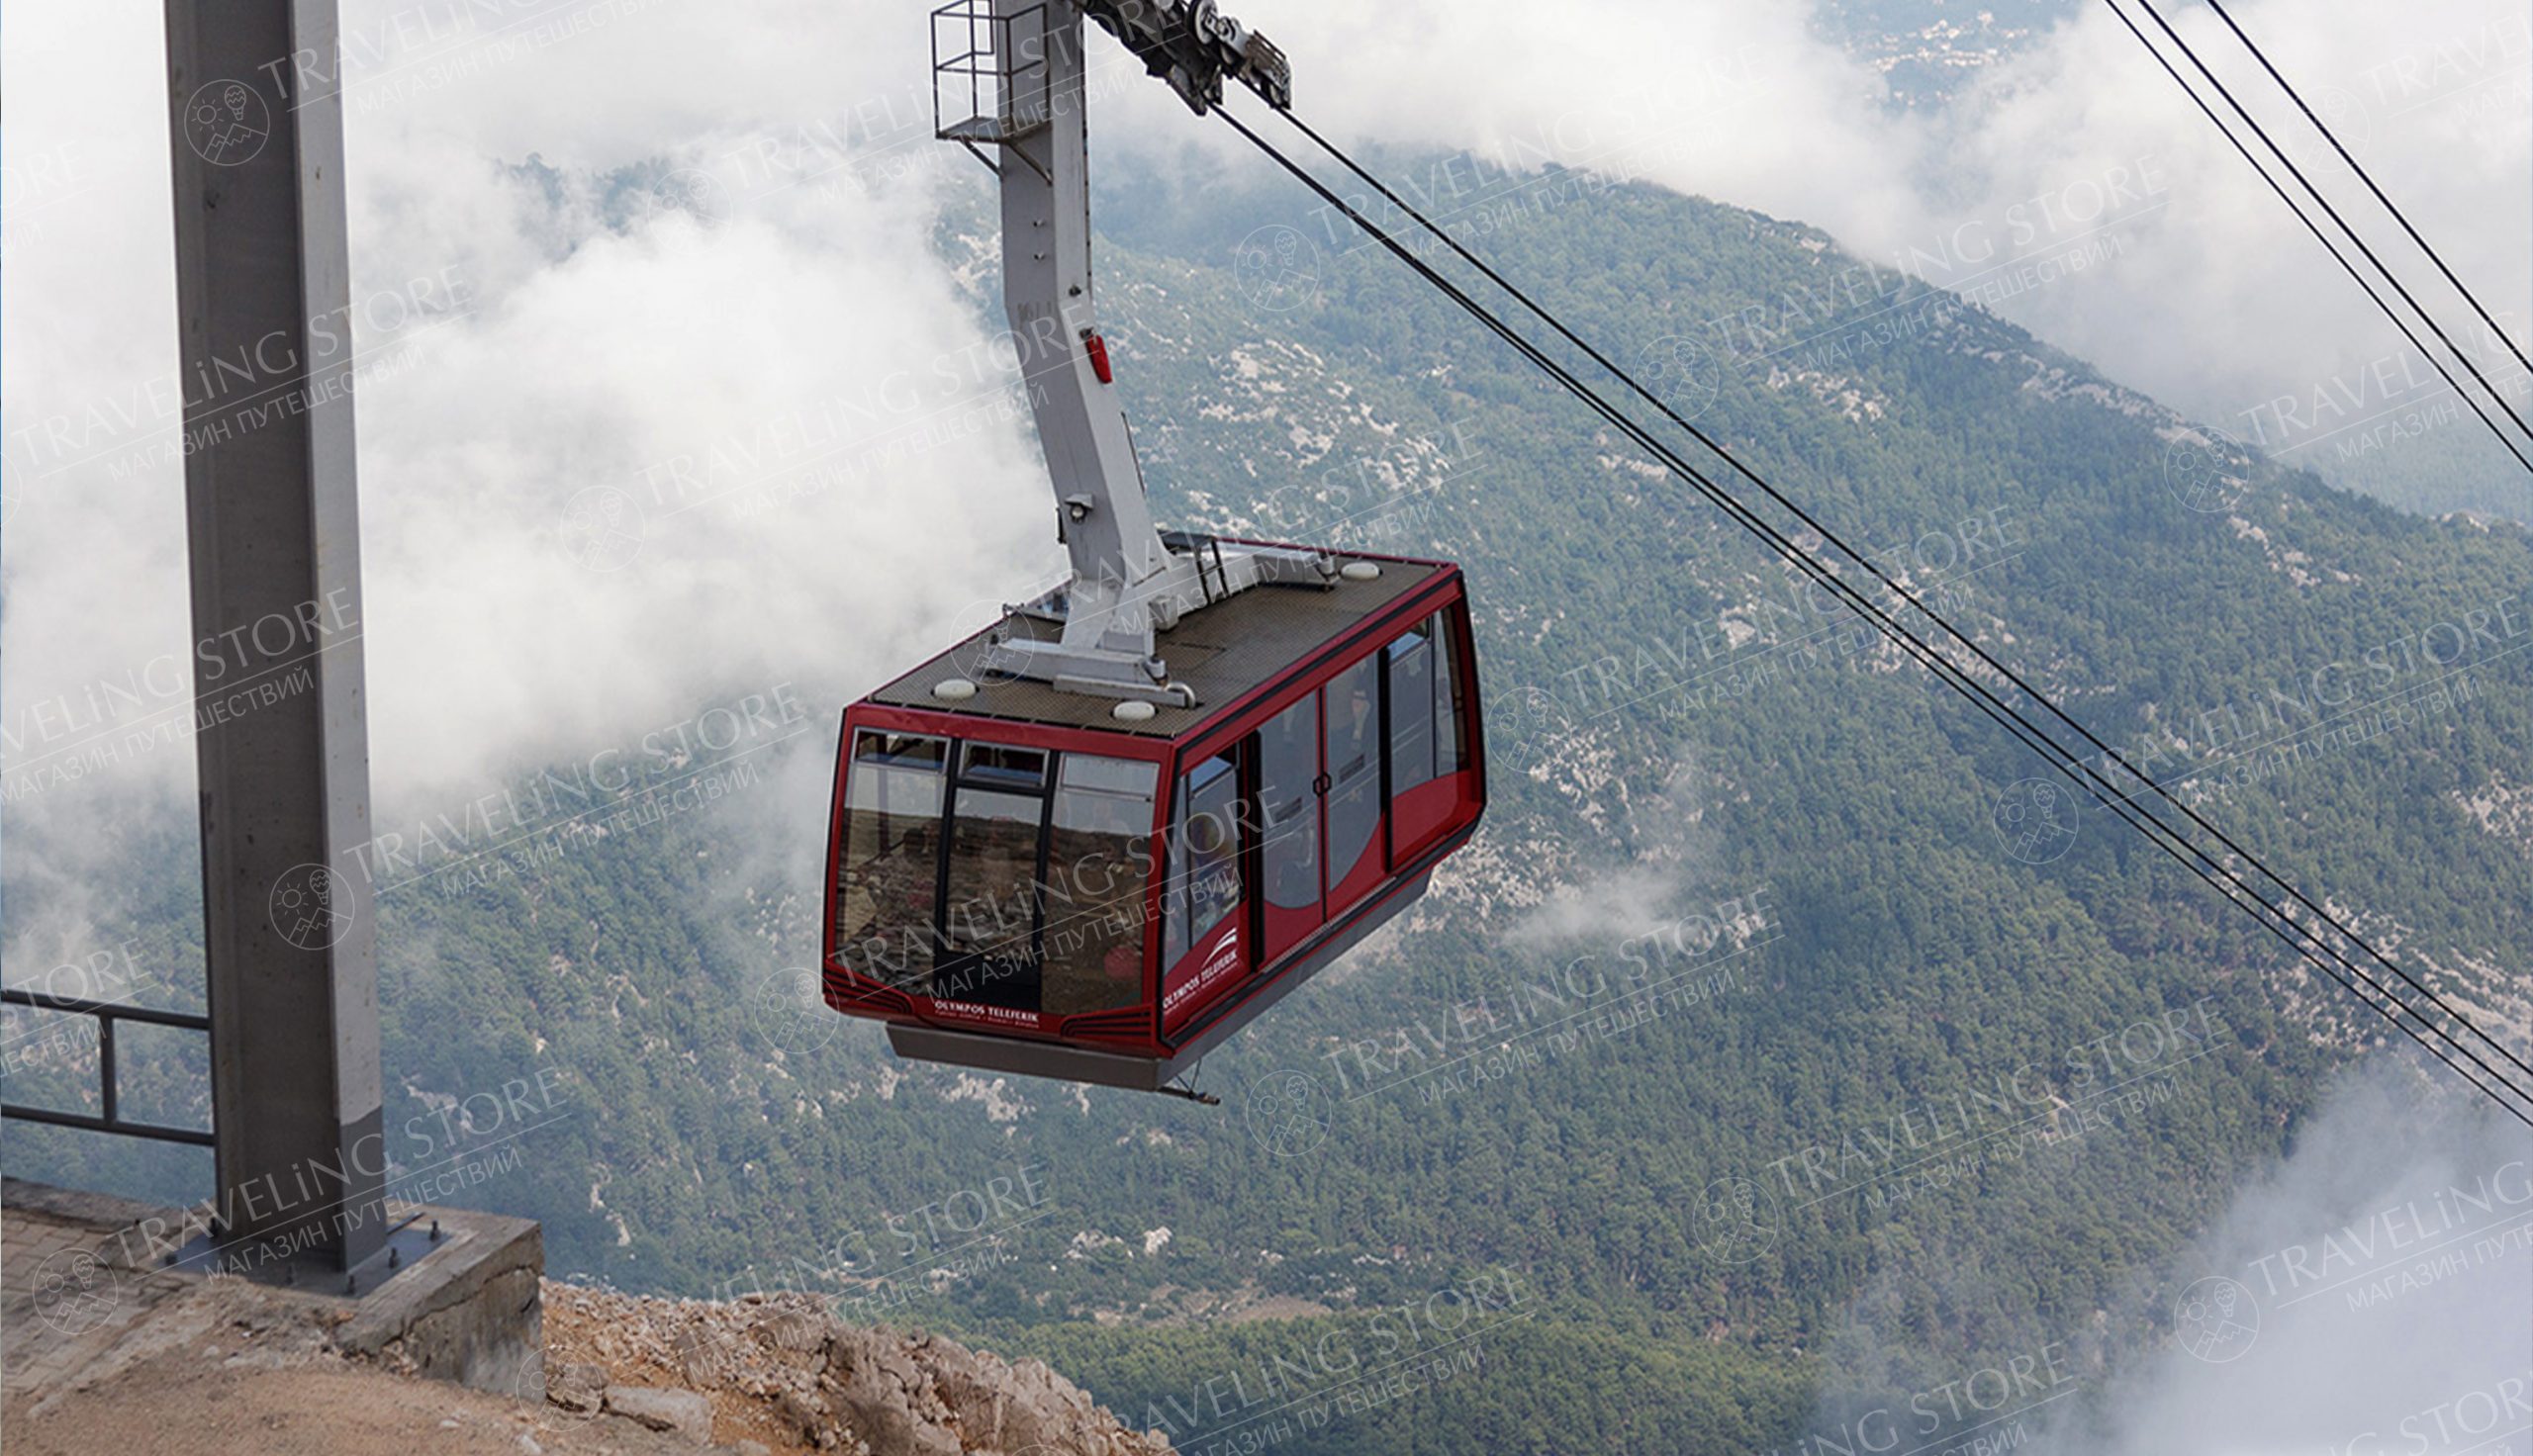 Tahtali Cable Car from Kemer